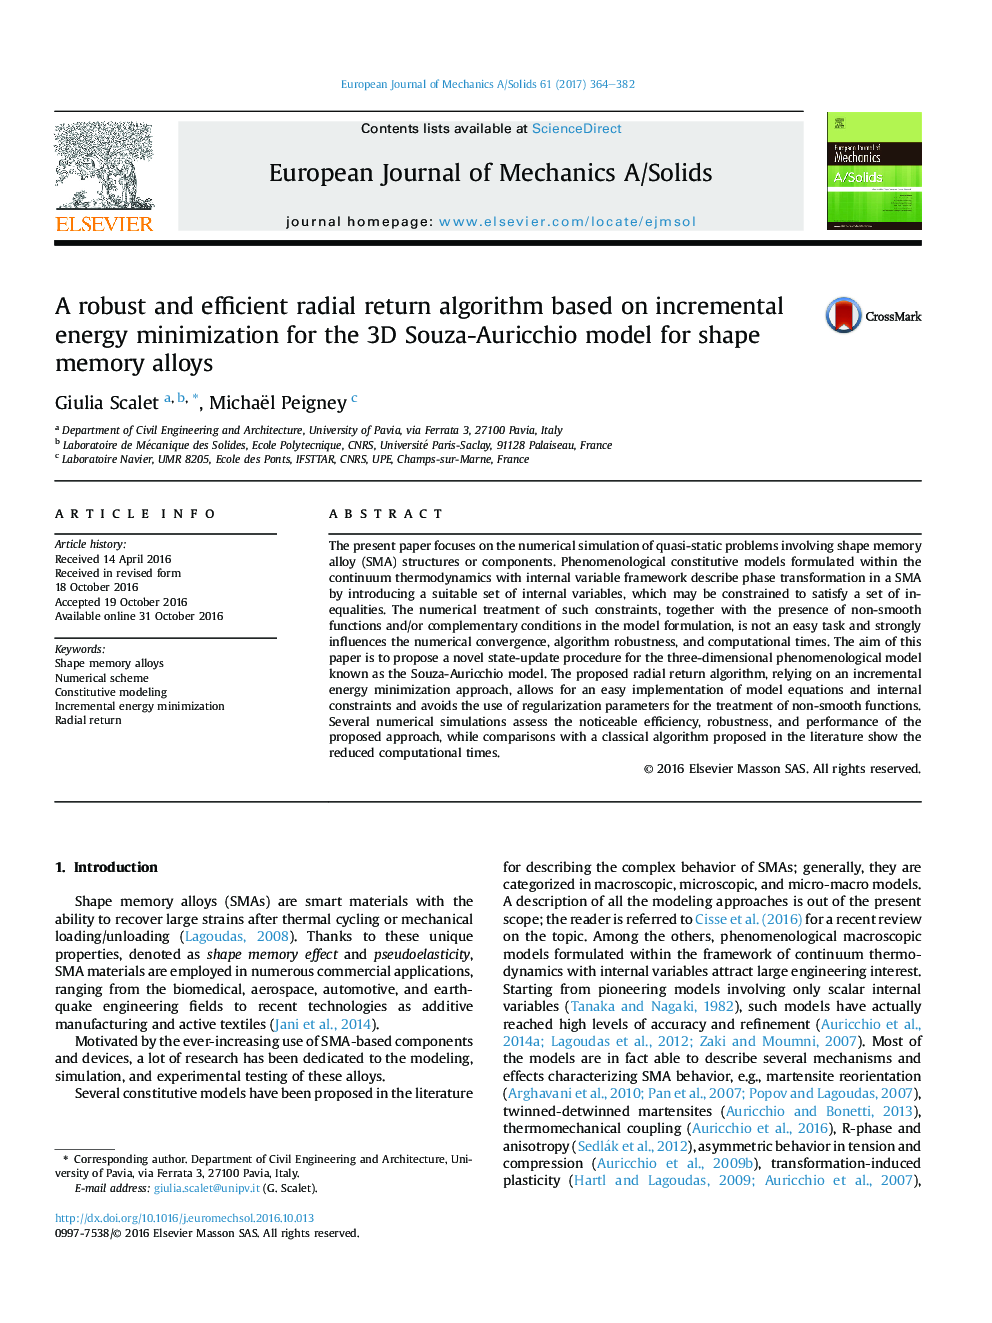 A robust and efficient radial return algorithm based on incremental energy minimization for the 3D Souza-Auricchio model for shape memory alloys